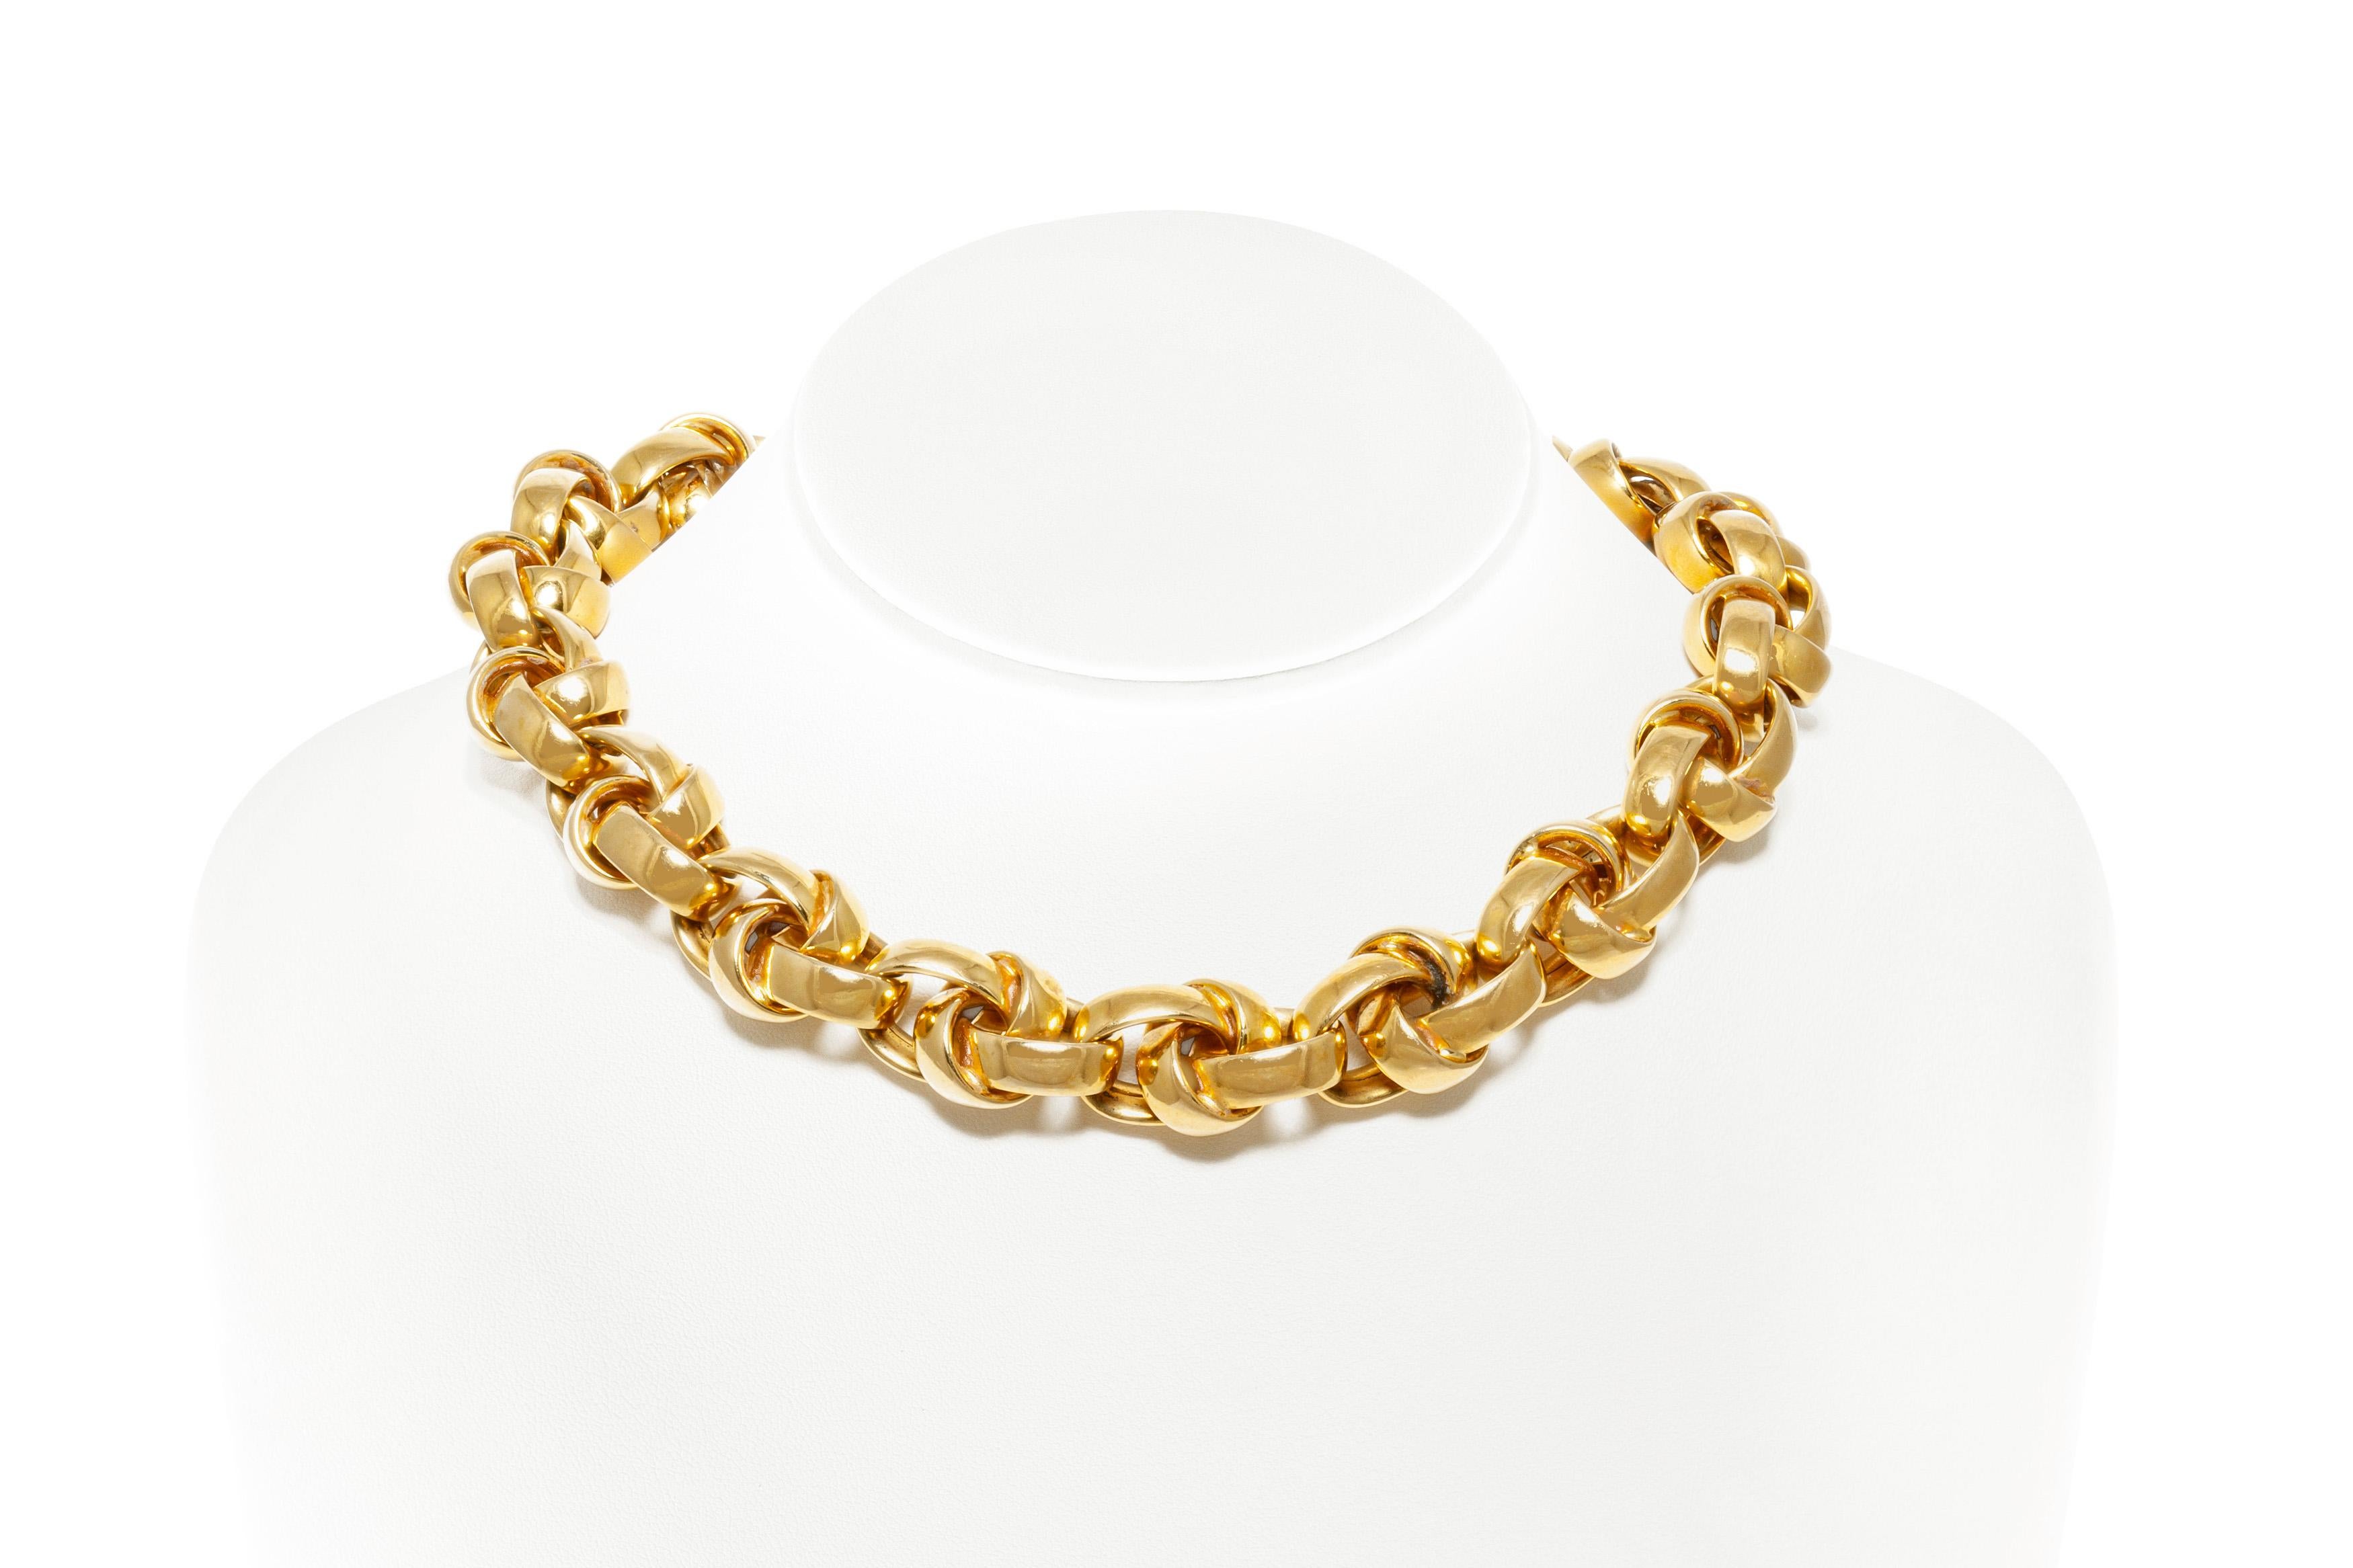 The necklace is finely crafted in 18k gold and weighing approximately total of 98.4 DWT.
